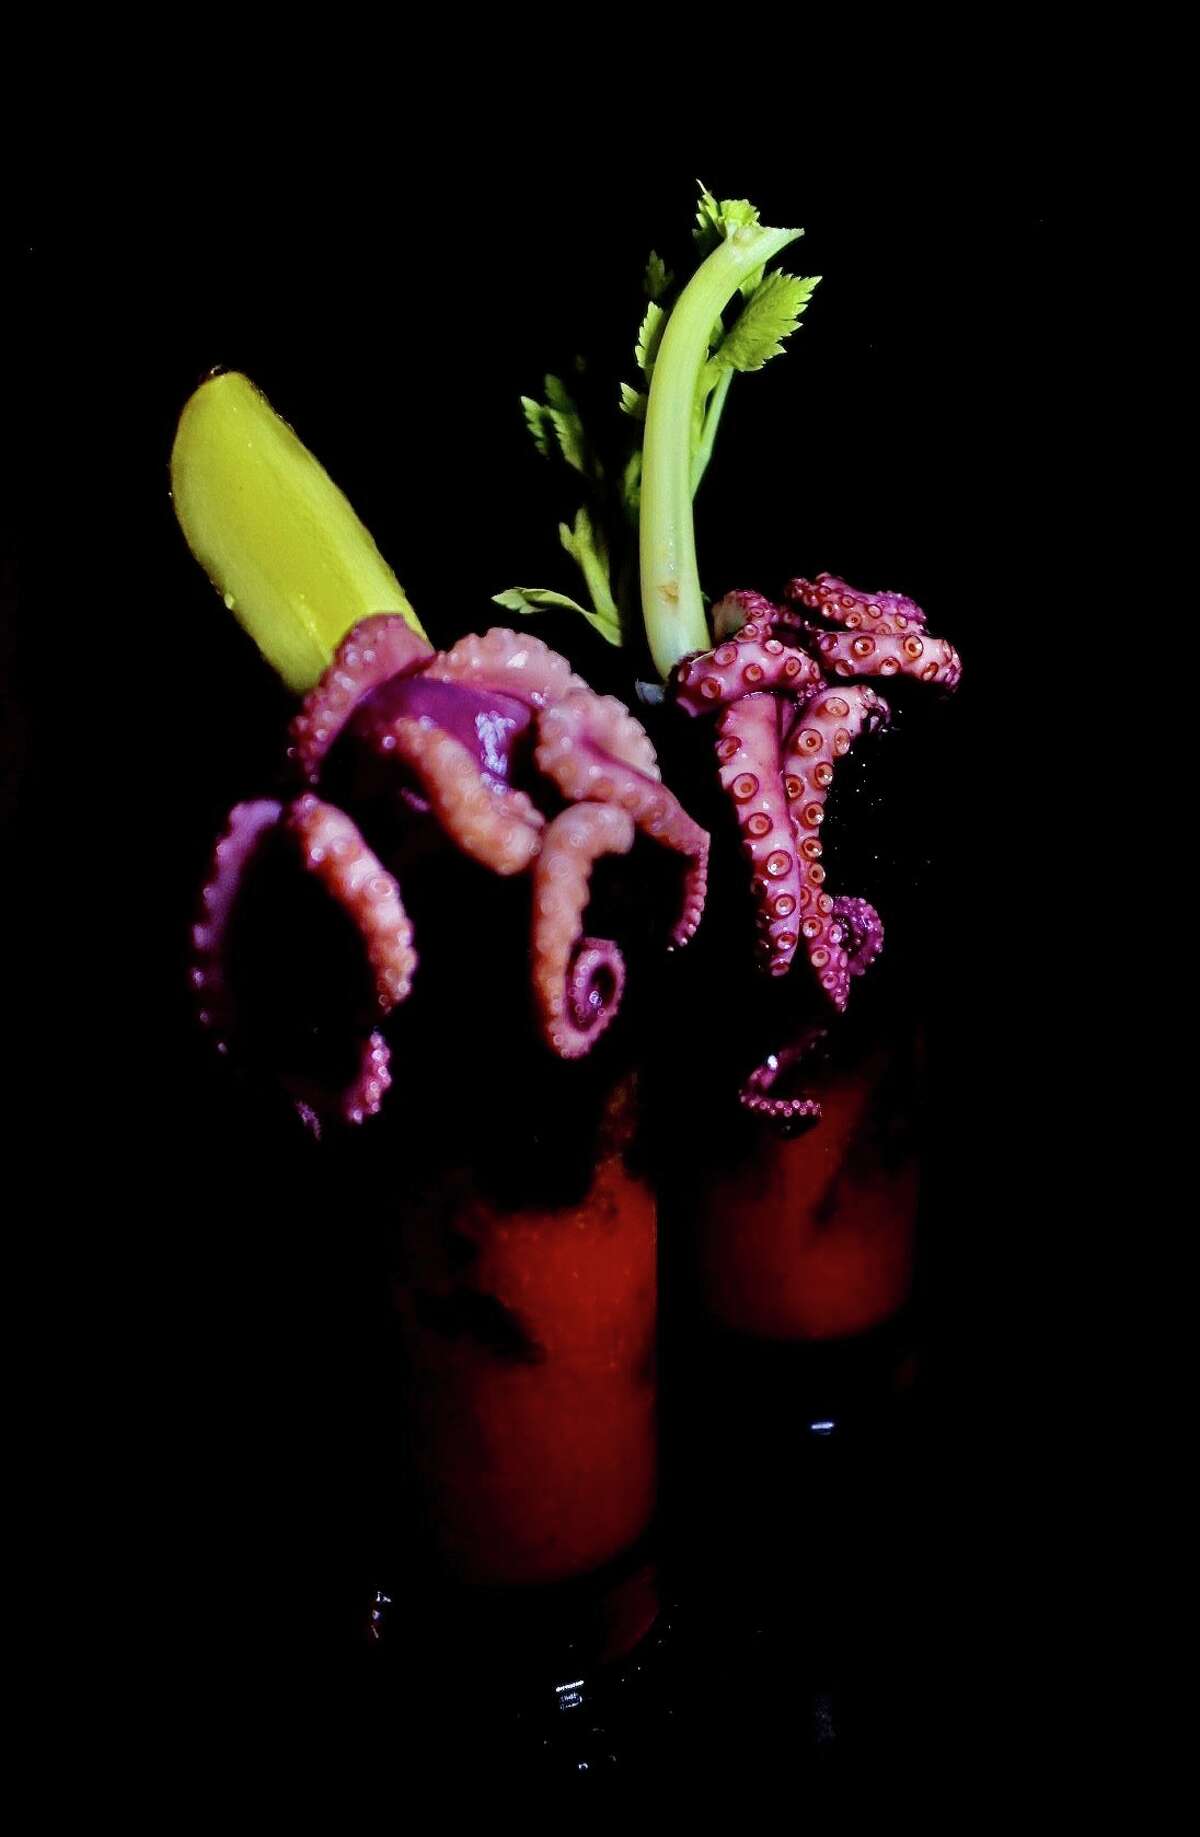 The Ursula, a special Bloody Mary at Norwalk's RHK Seafood Boil + Bar, features vodka, kimchi, horseradish, squid ink and tomato juice capped with grilled octopus. It's on special Oct. 25 to Oct. 31 for Halloween.